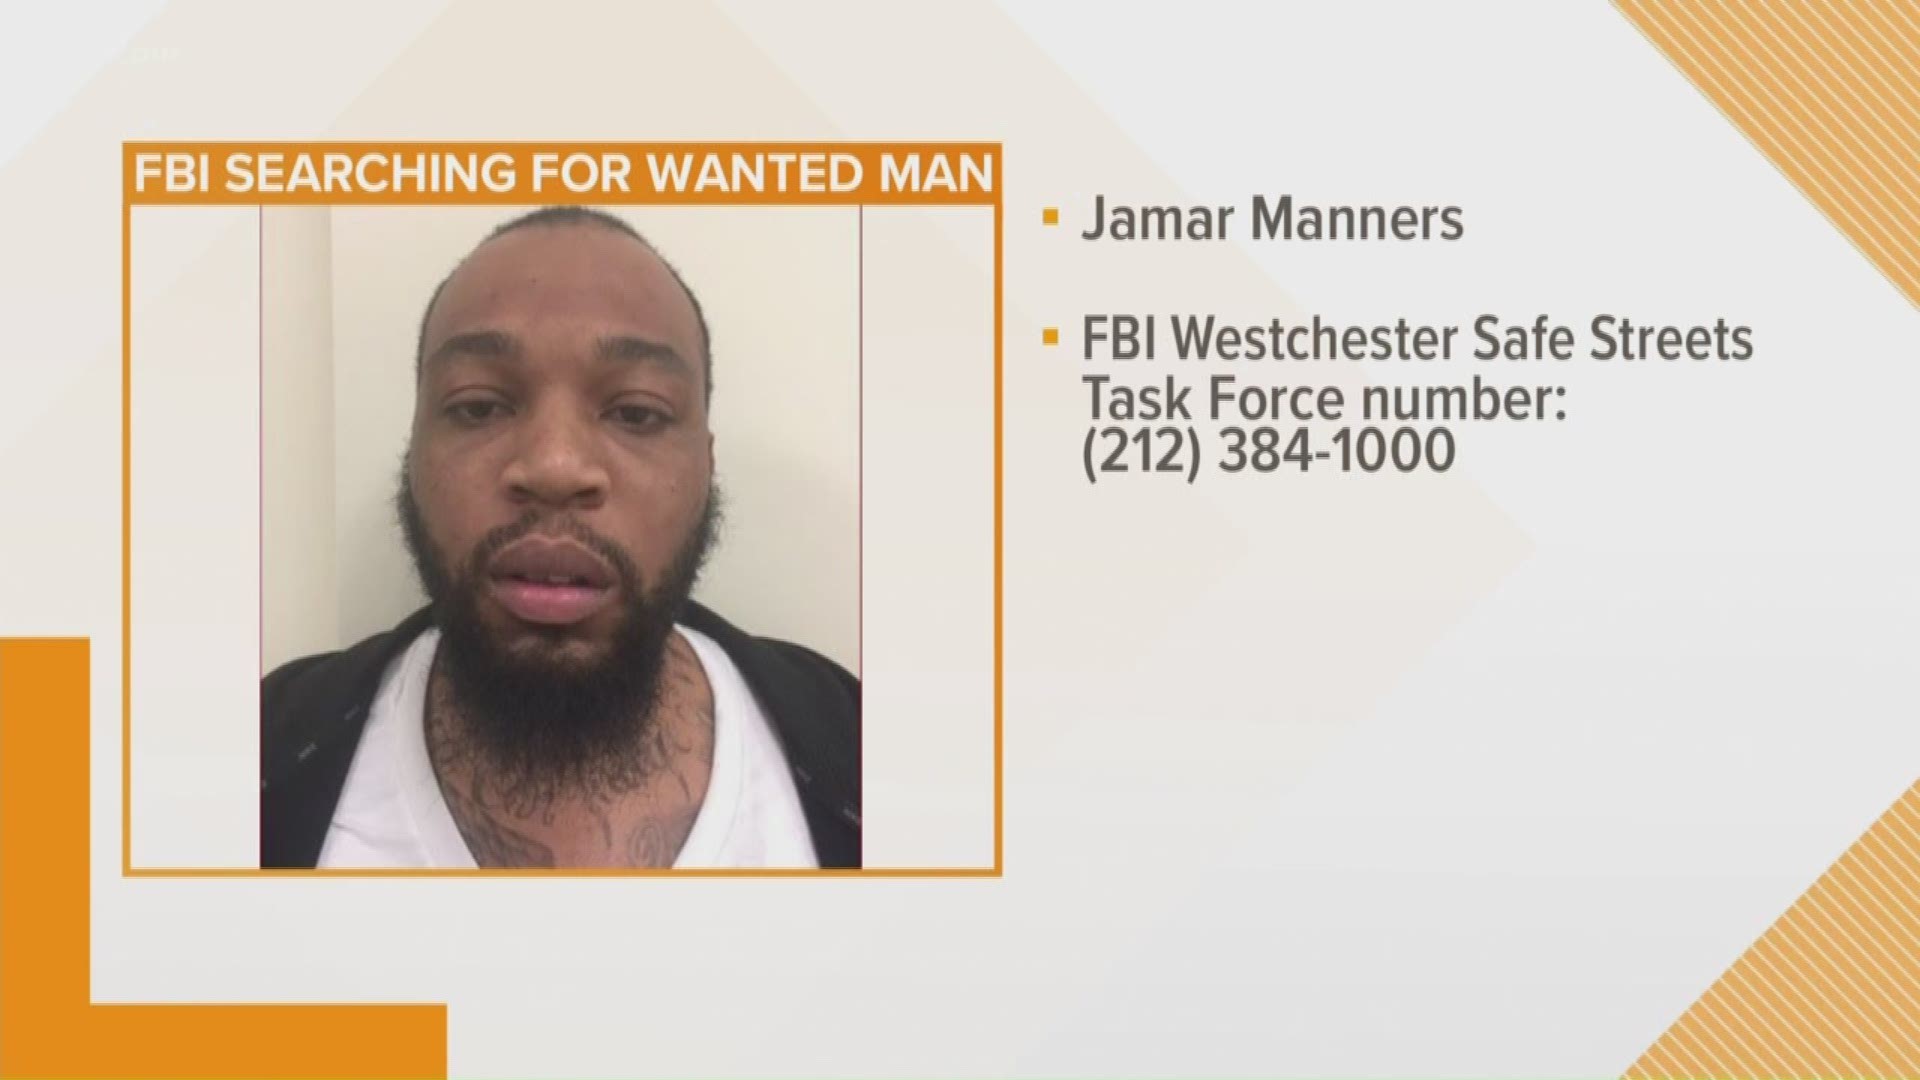 The agency says the gang member from New York may be in the Charleston area.